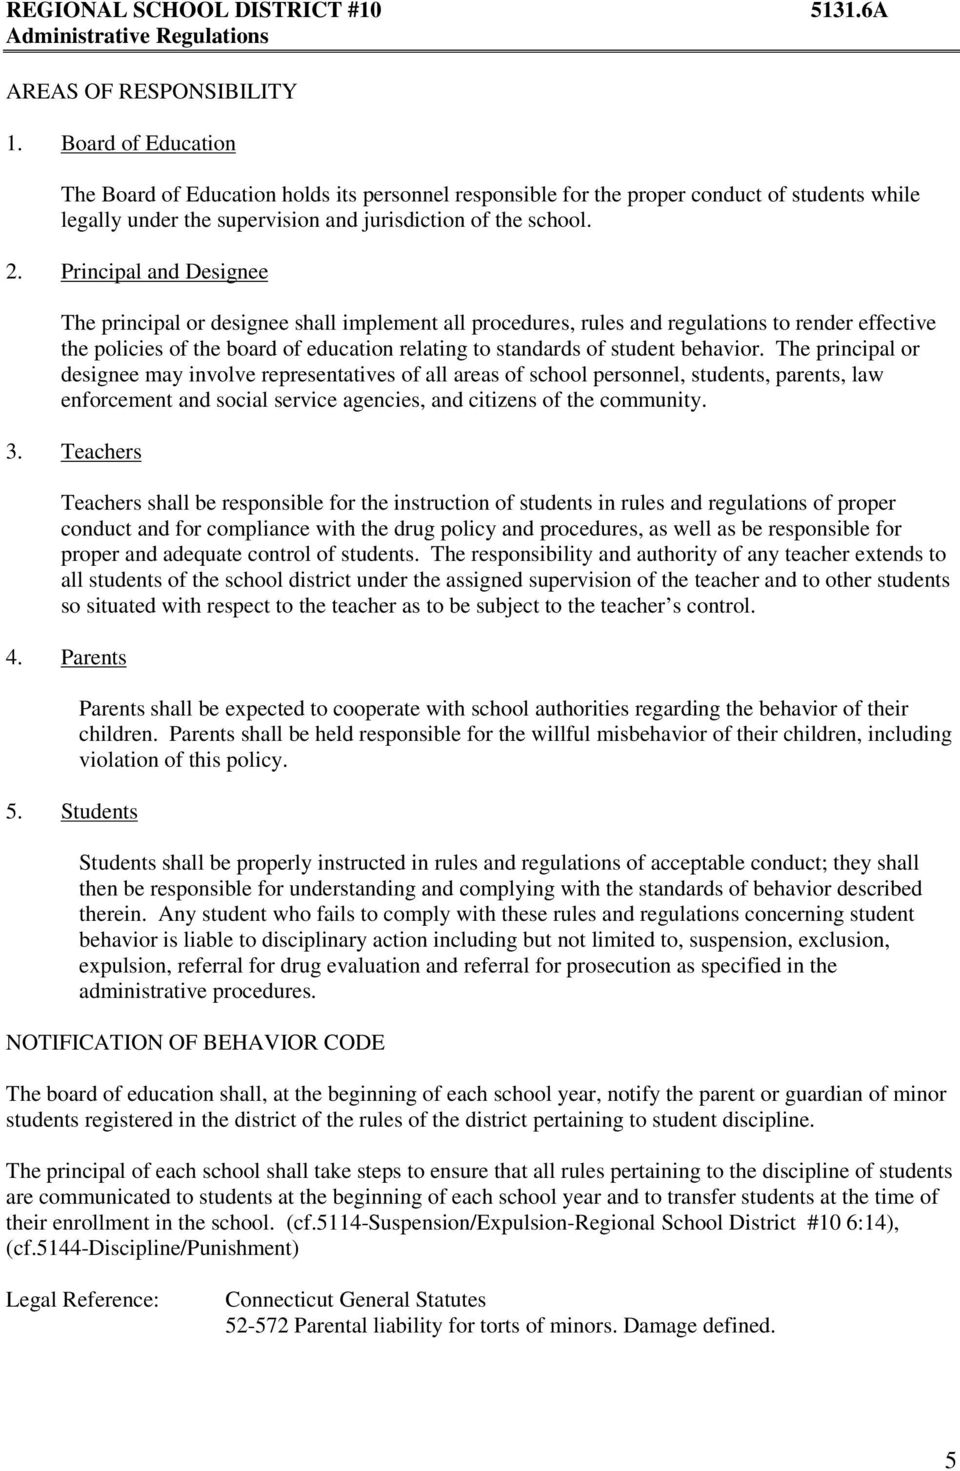 Principal and Designee The principal or designee shall implement all procedures, rules and regulations to render effective the policies of the board of education relating to standards of student